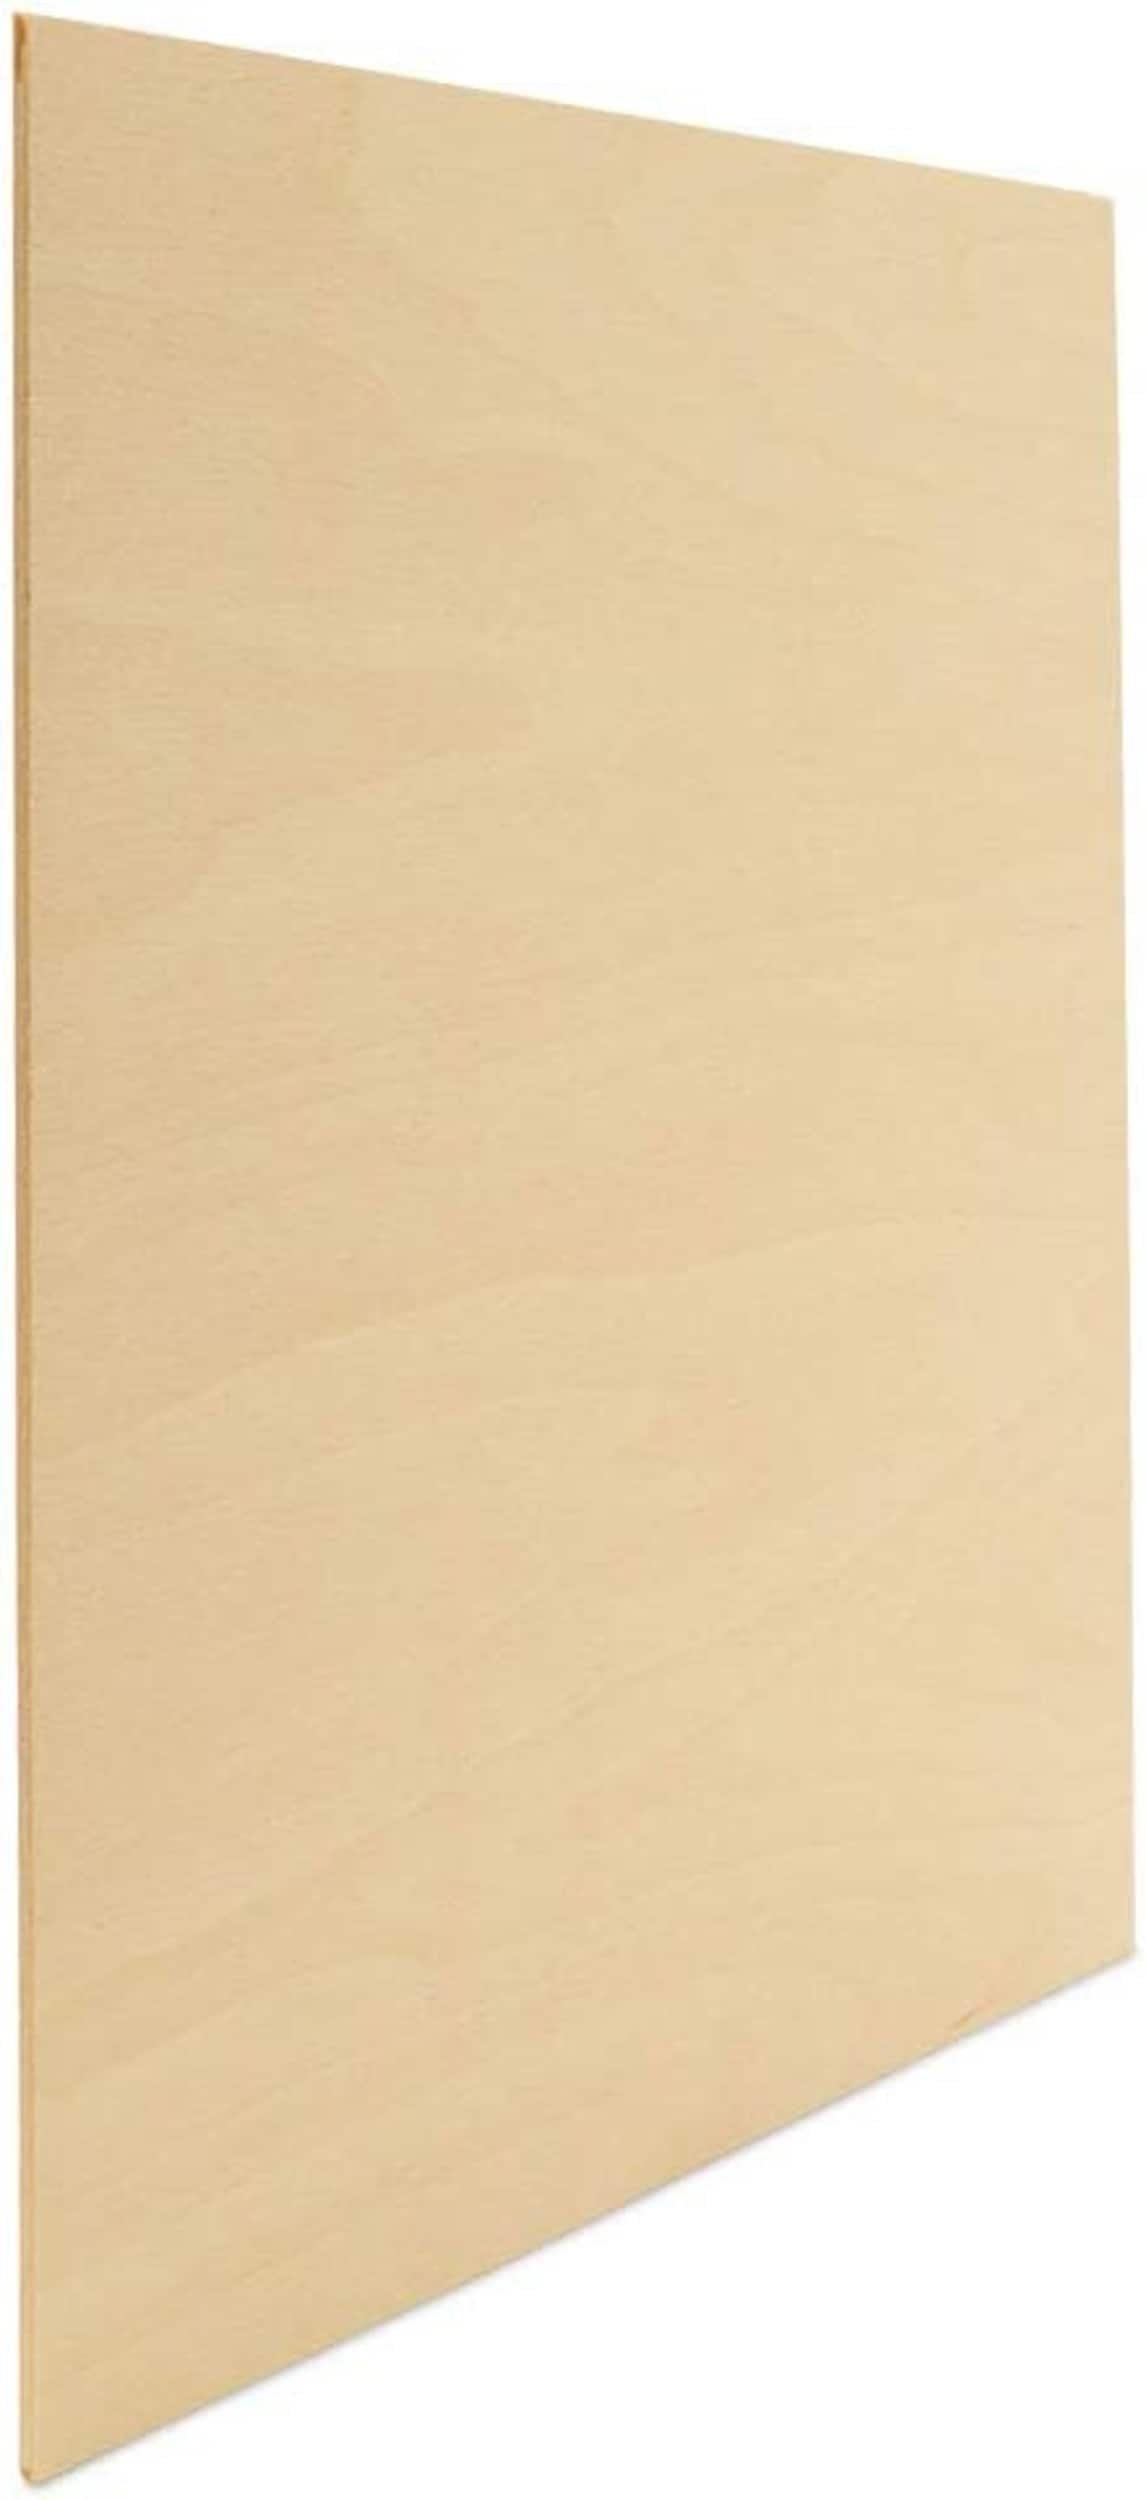 Woodpeckers Crafts Baltic Birch Plywood, 3 Mm 1/8 X 12 X 8 In. Craft Wood,  Box Of 16 B/Bb in the Craft Supplies department at